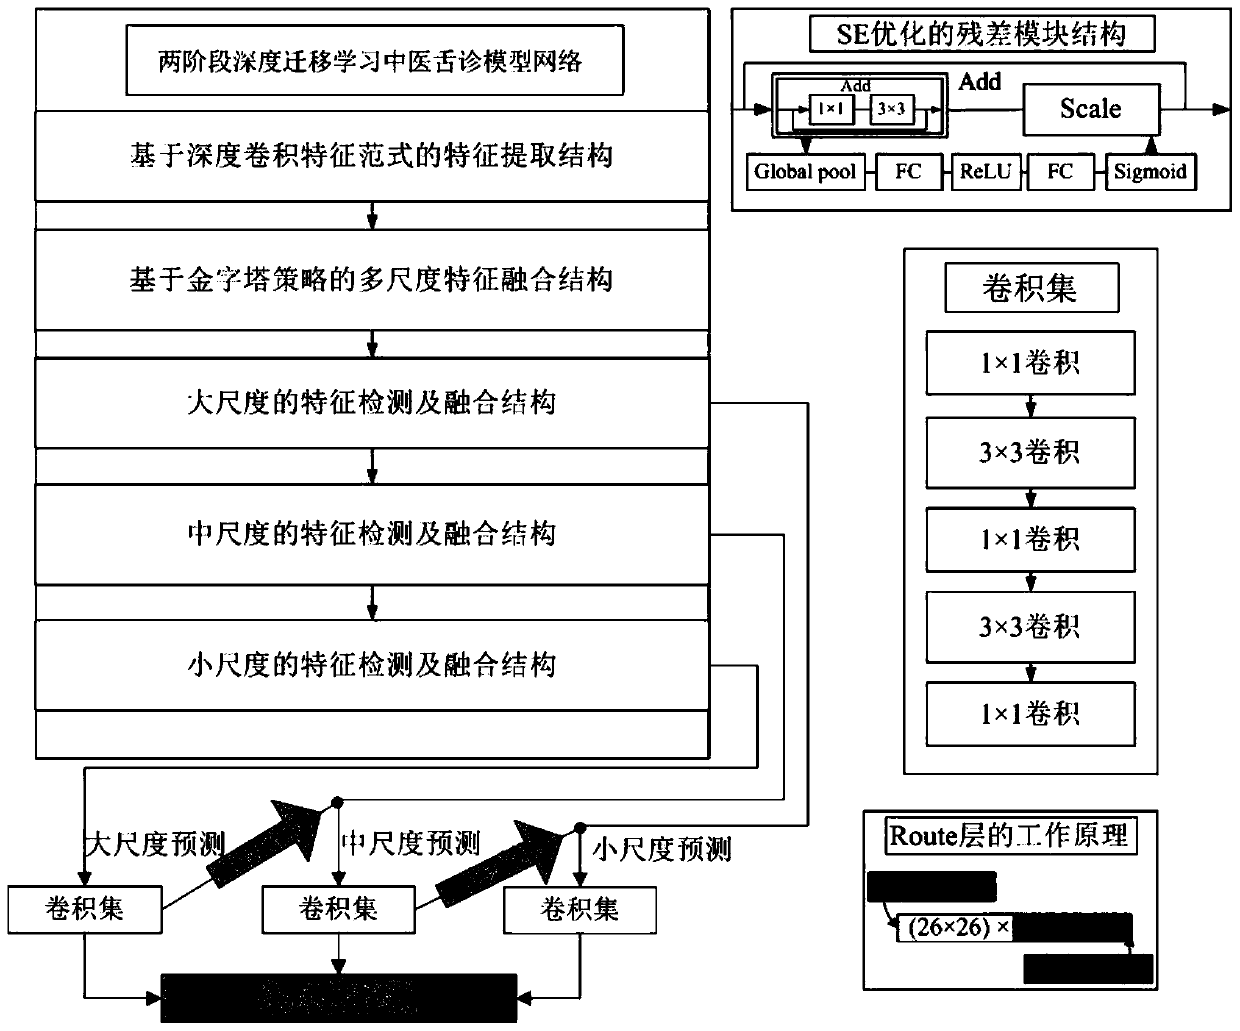 Two-stage deep transfer learning traditional Chinese medicine tongue diagnosis model